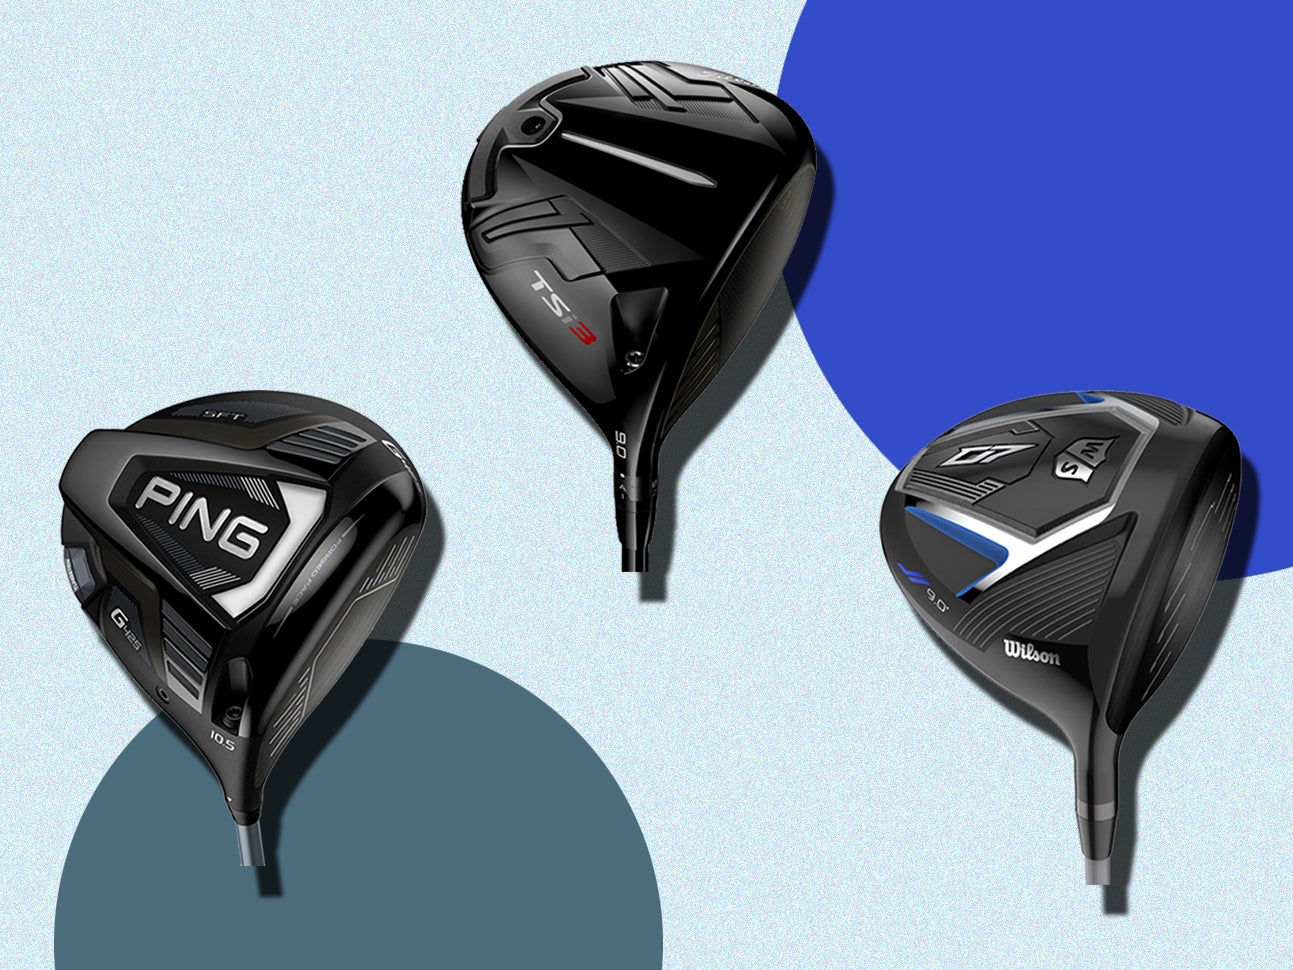 Adjustable weights on new drivers let you fine tune your game